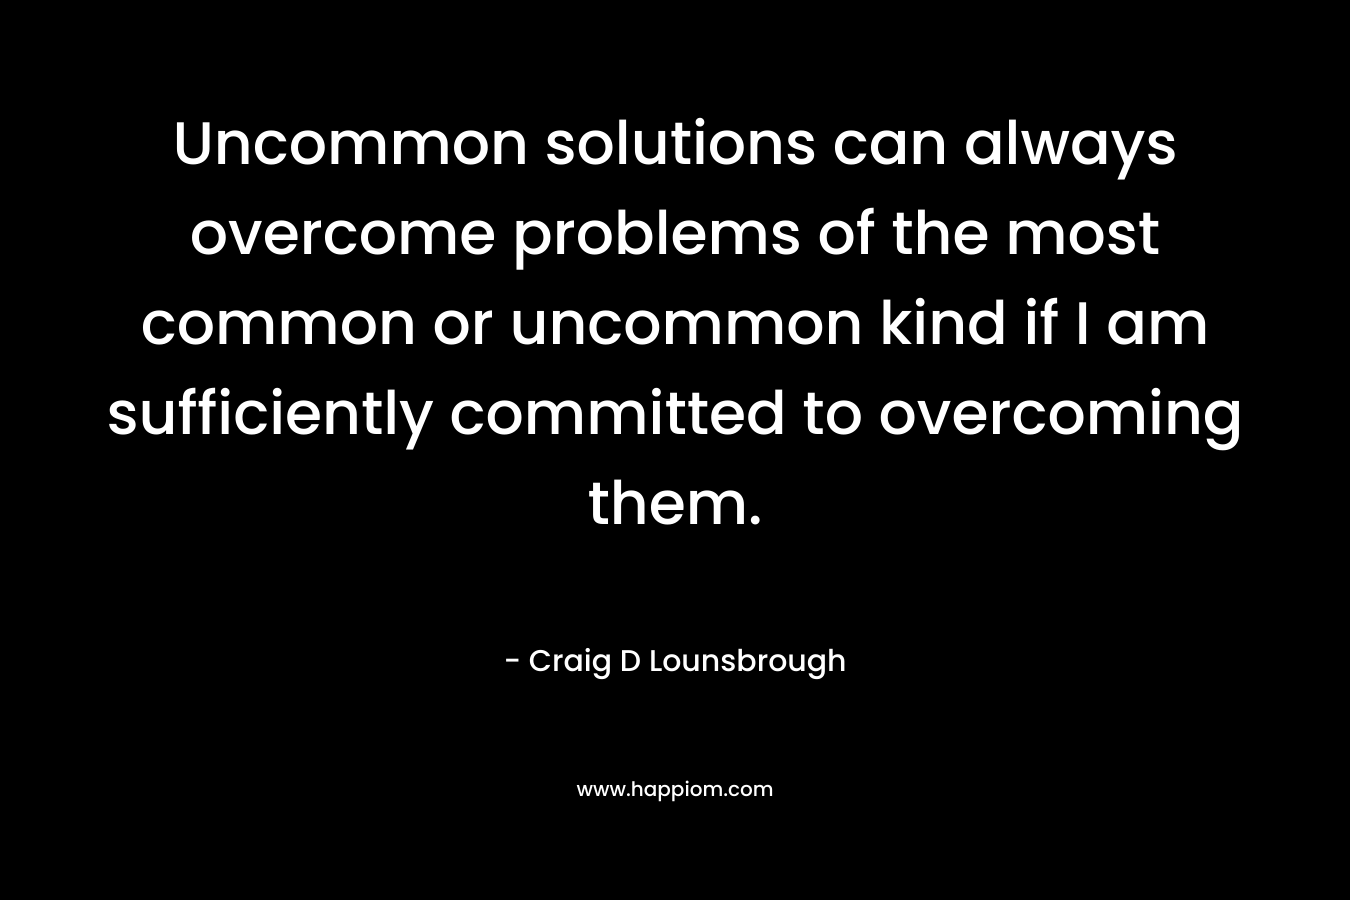 Uncommon solutions can always overcome problems of the most common or uncommon kind if I am sufficiently committed to overcoming them. – Craig D Lounsbrough